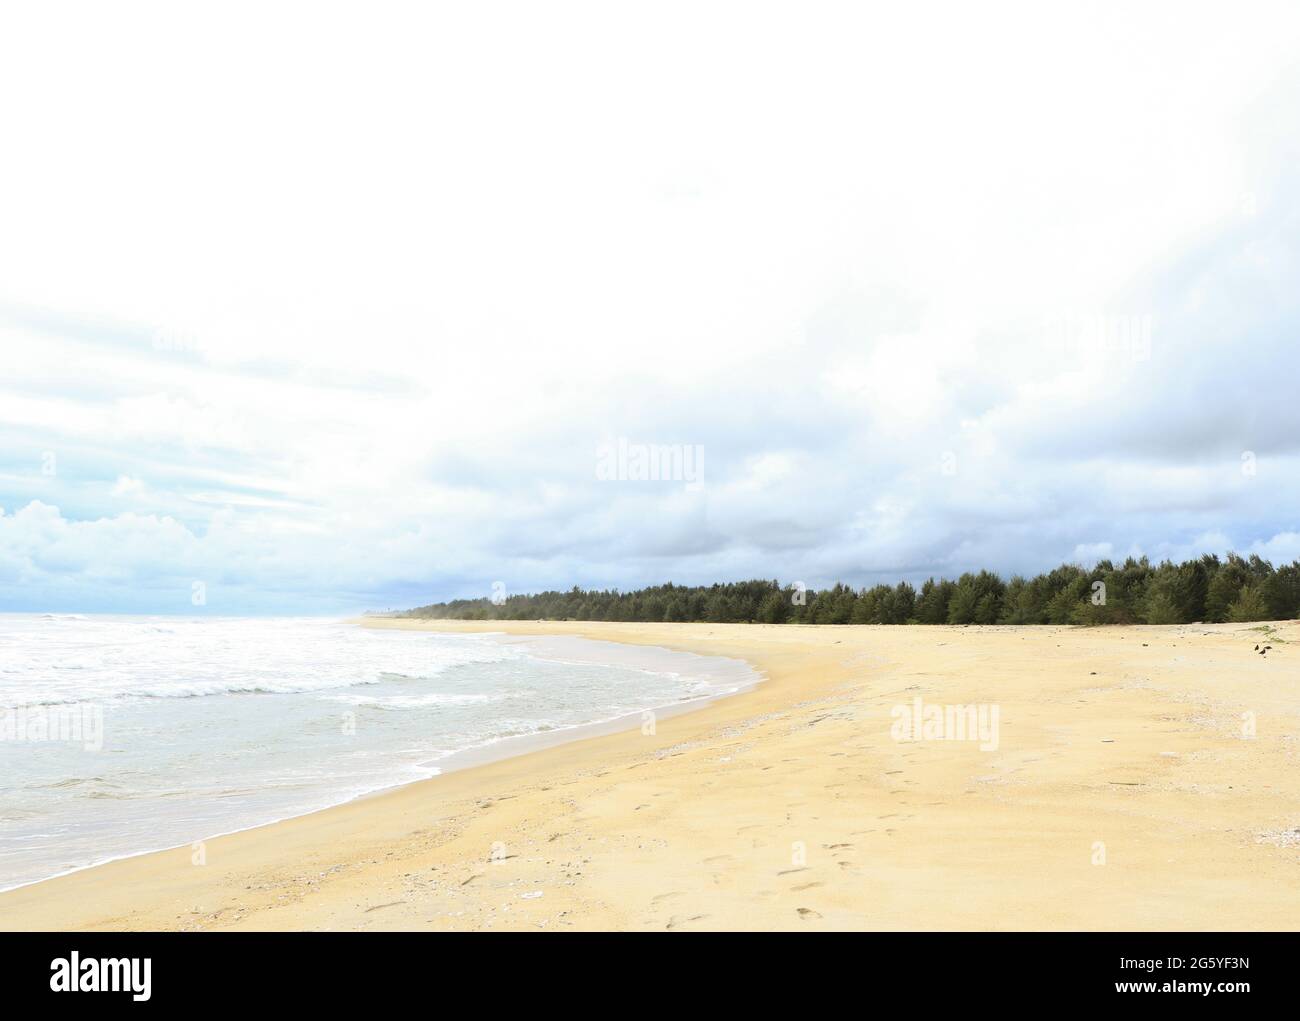 sand beach and deciduous trees on a bright day with cloudy blue sky on an island Stock Photo